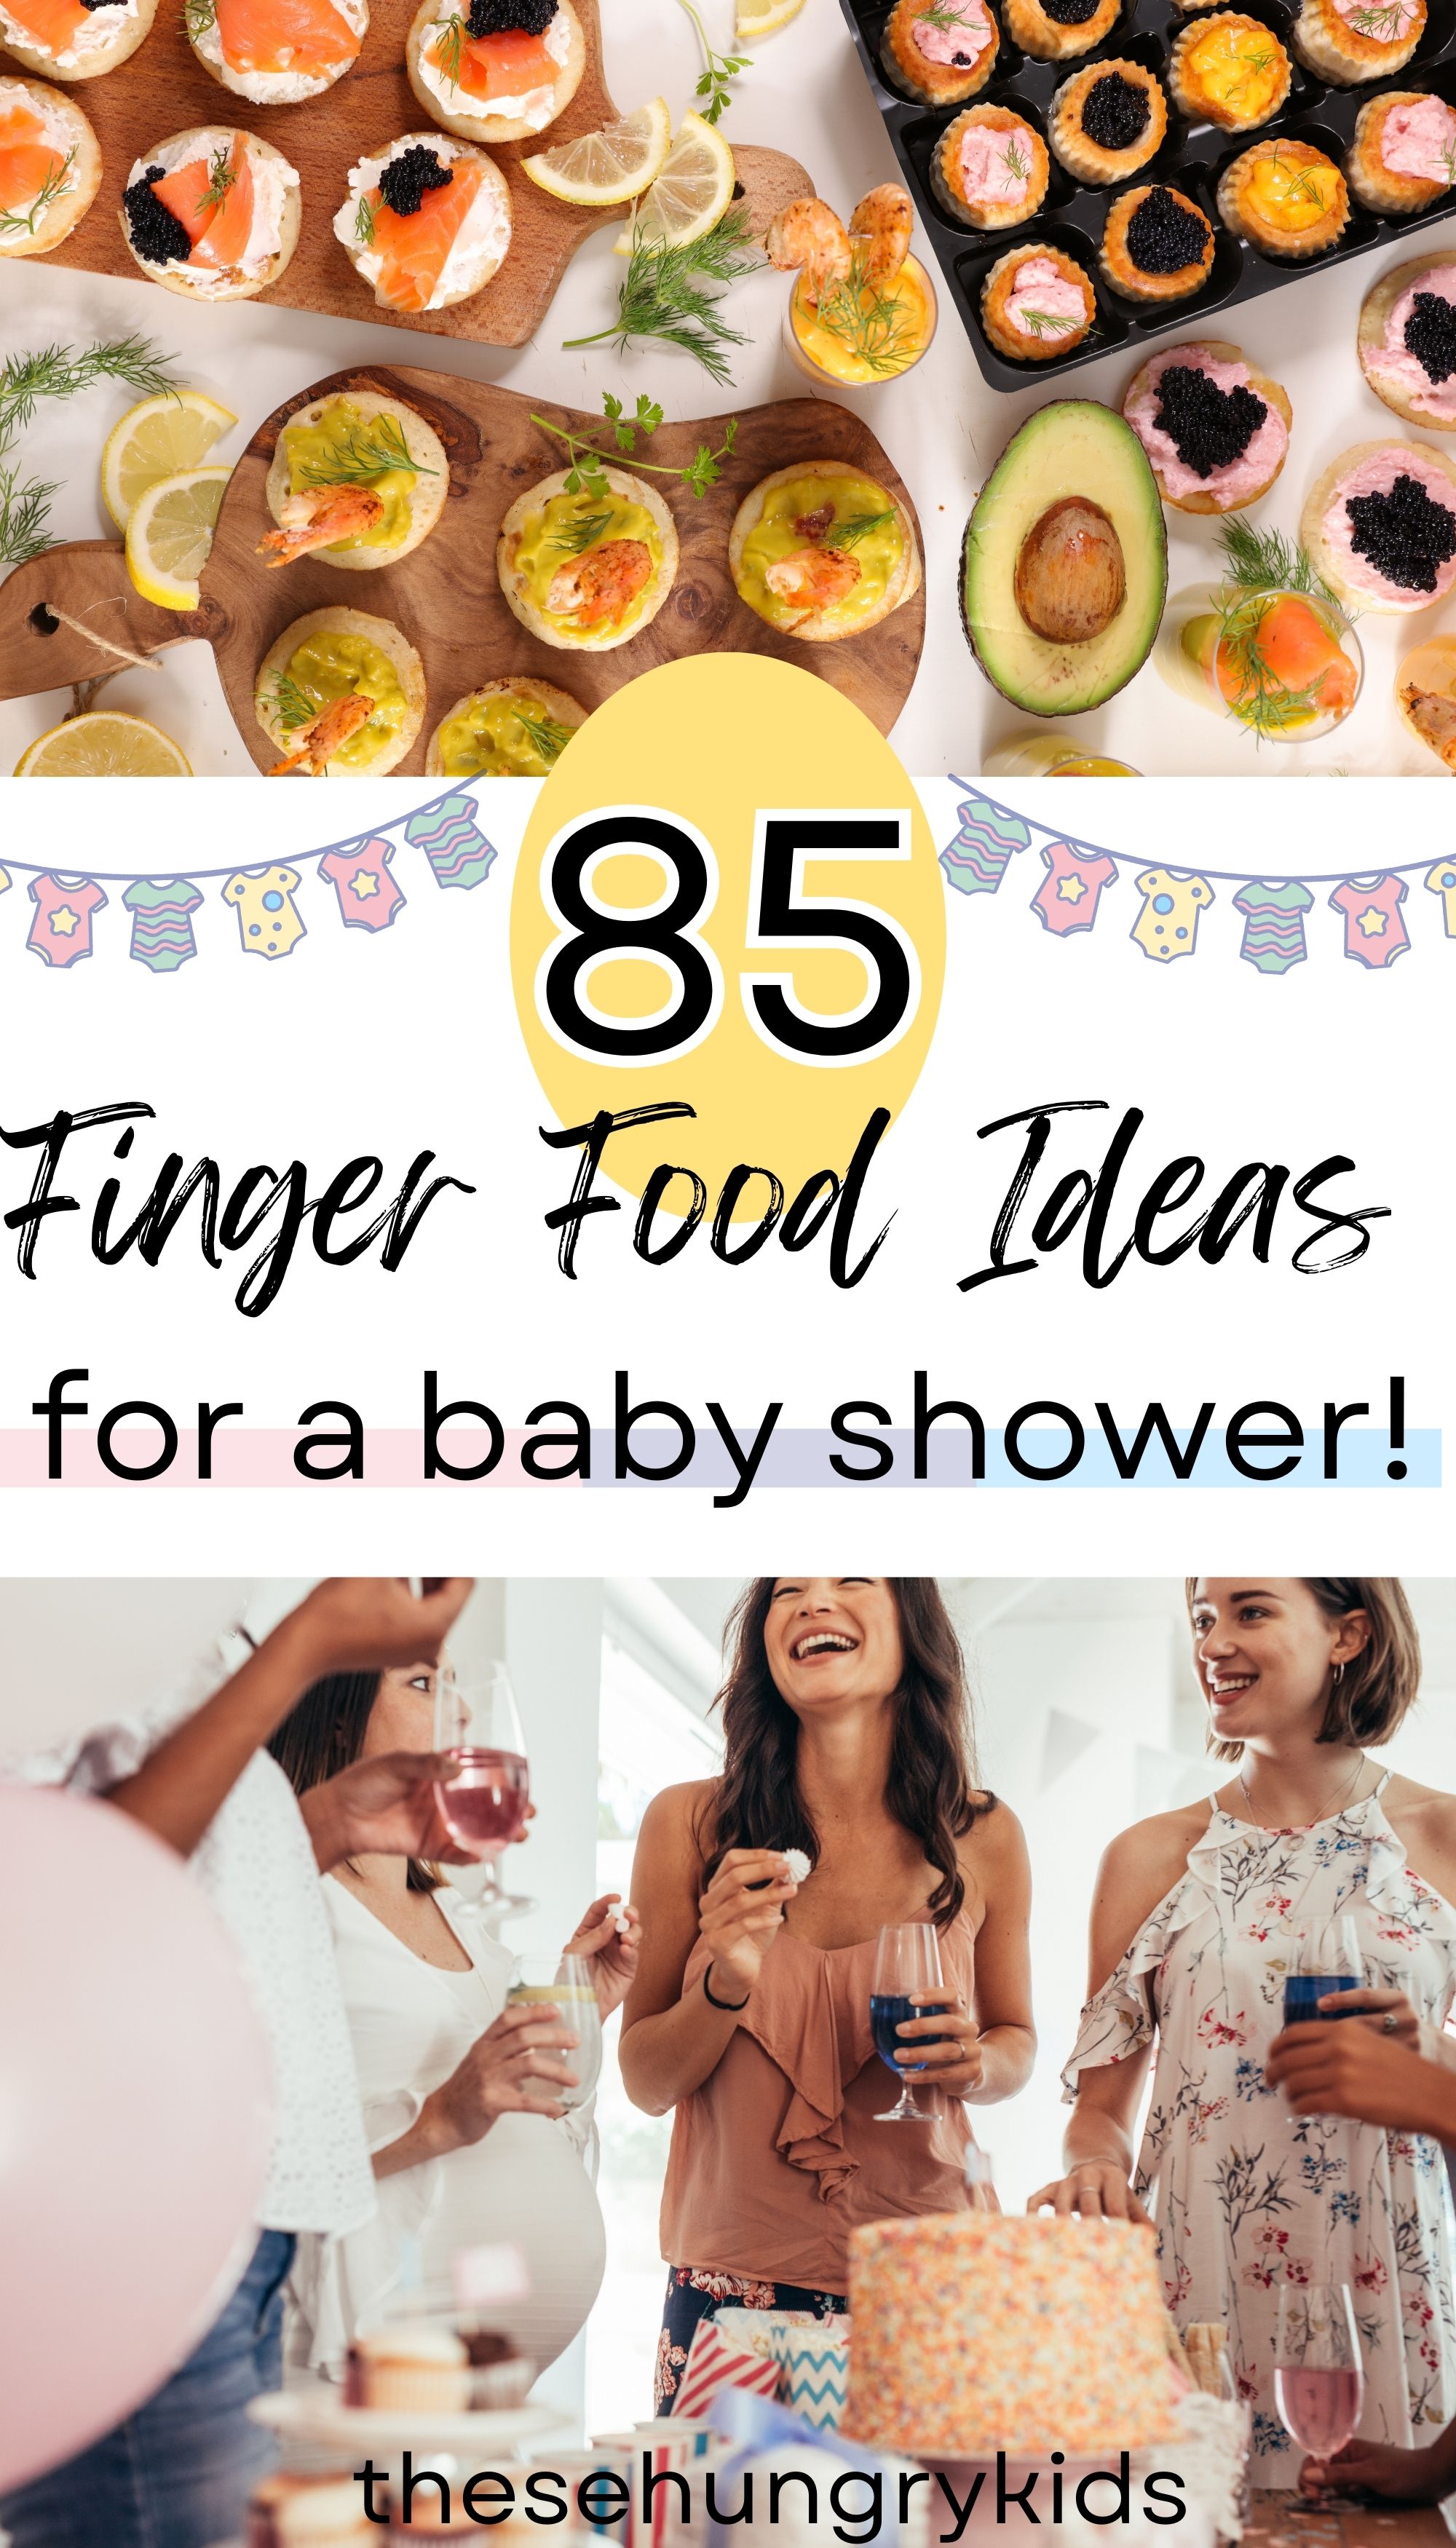 a long rectangular graphic. The top image shows a variety of finger foods on a display table with an overhead view, then text that says 85 finger food ideas for a baby shower in the middle with a yellow circle under 85 and a graphic of baby onesies hanging on a line, and the bottom image shows a group of women at a baby shower laughing and eating